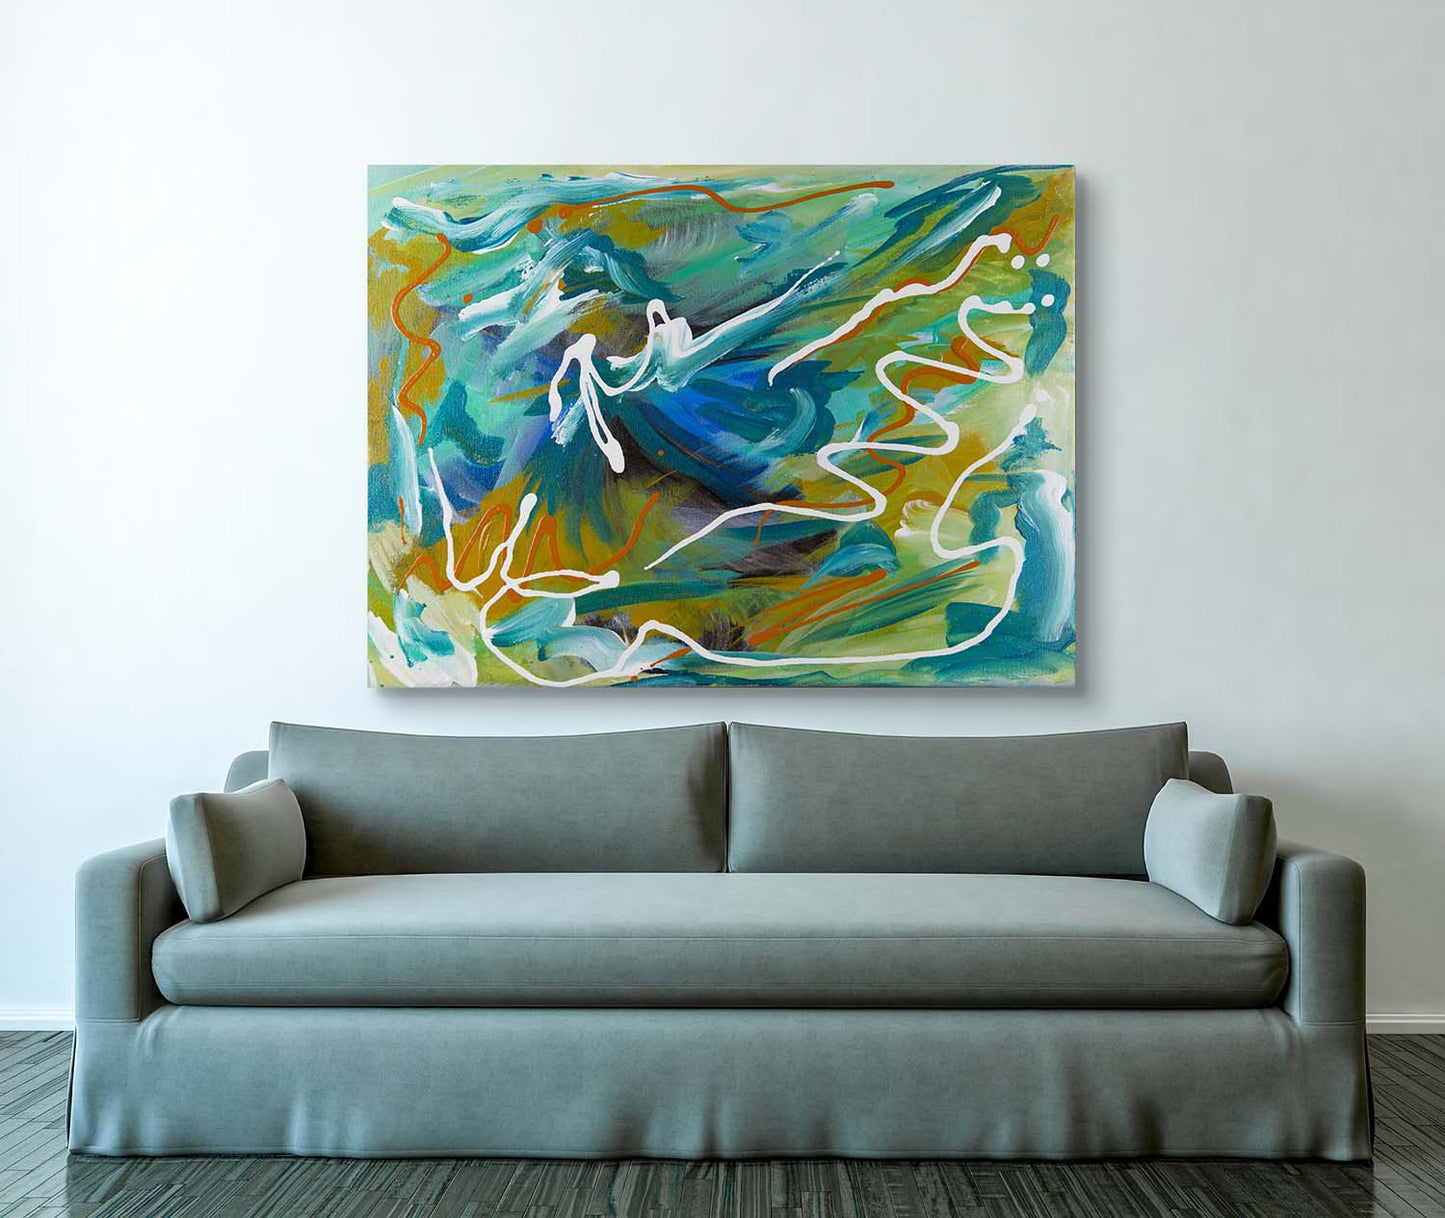 Eastern Mountain abstract canvas painting by Doug LaRue on a wall behind a couch